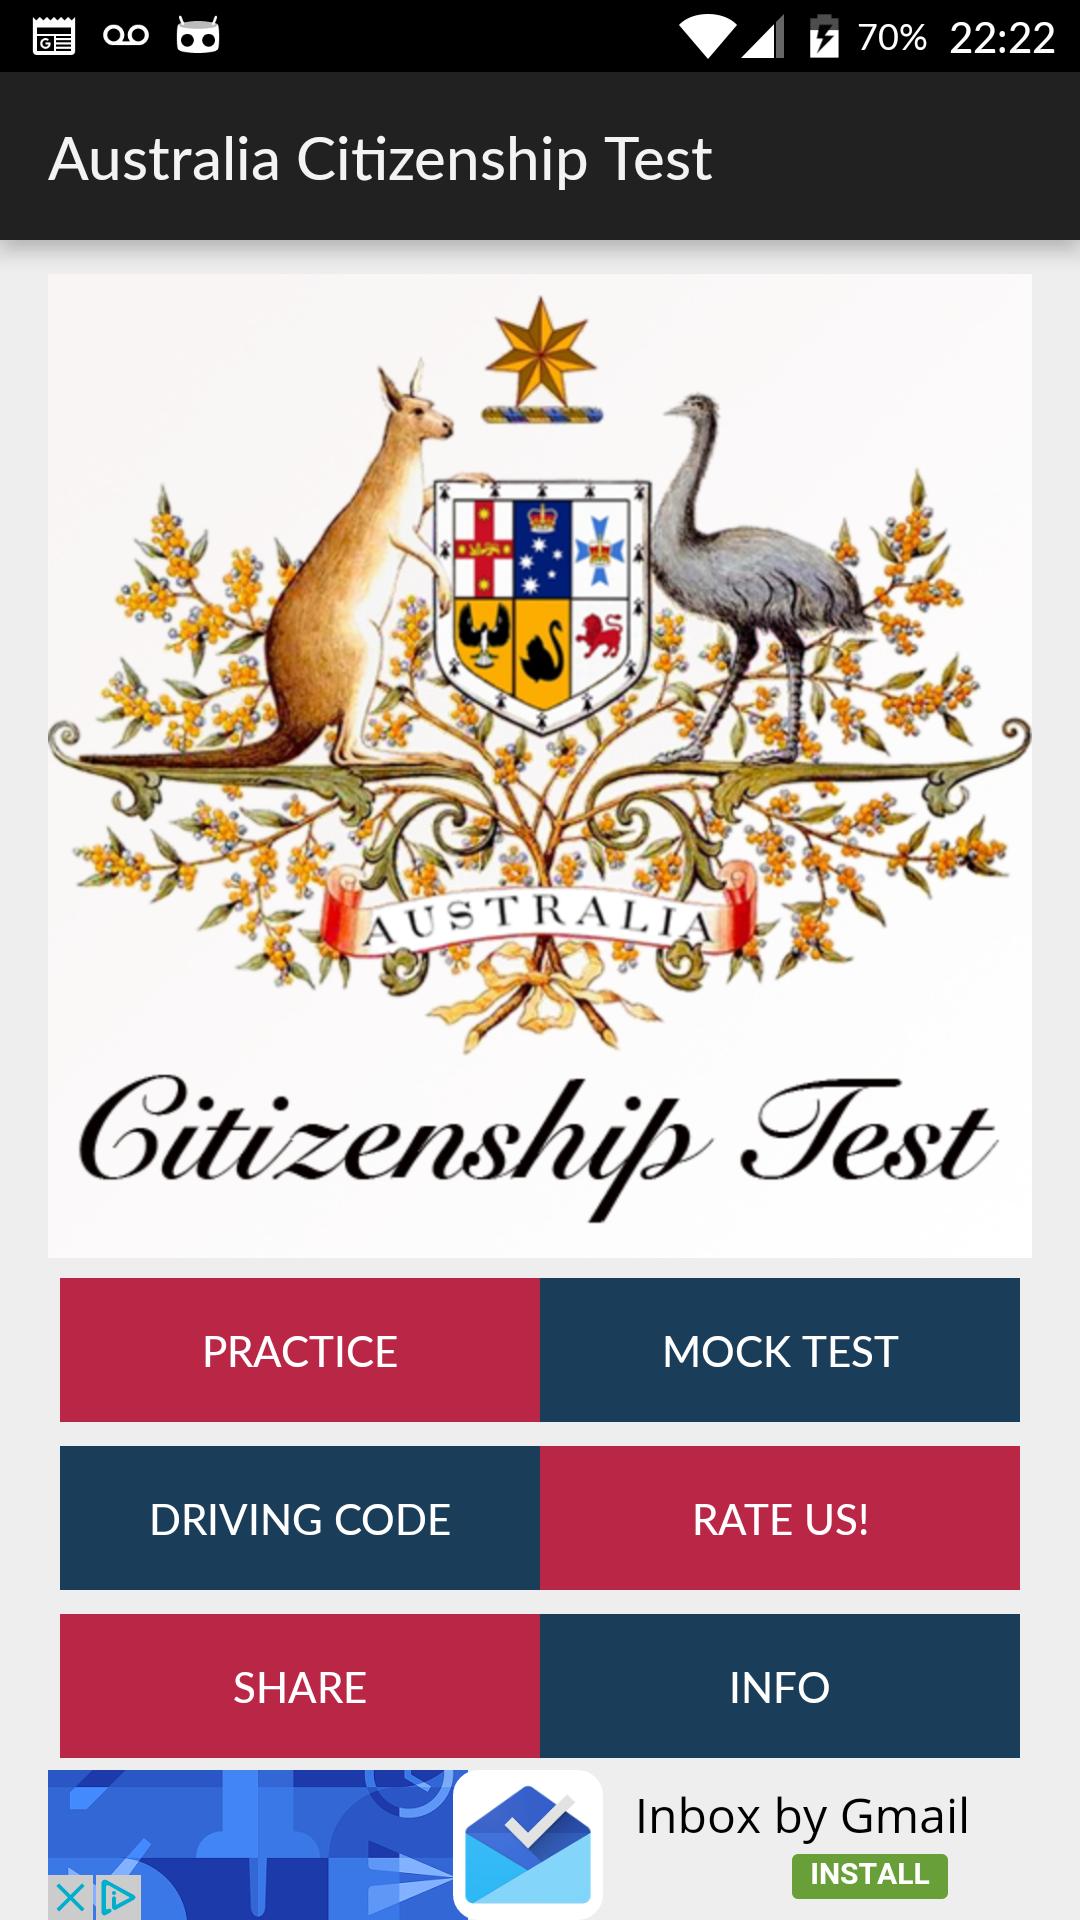 2020 Guide to Australian Citizenship Exam for Android - APK Download